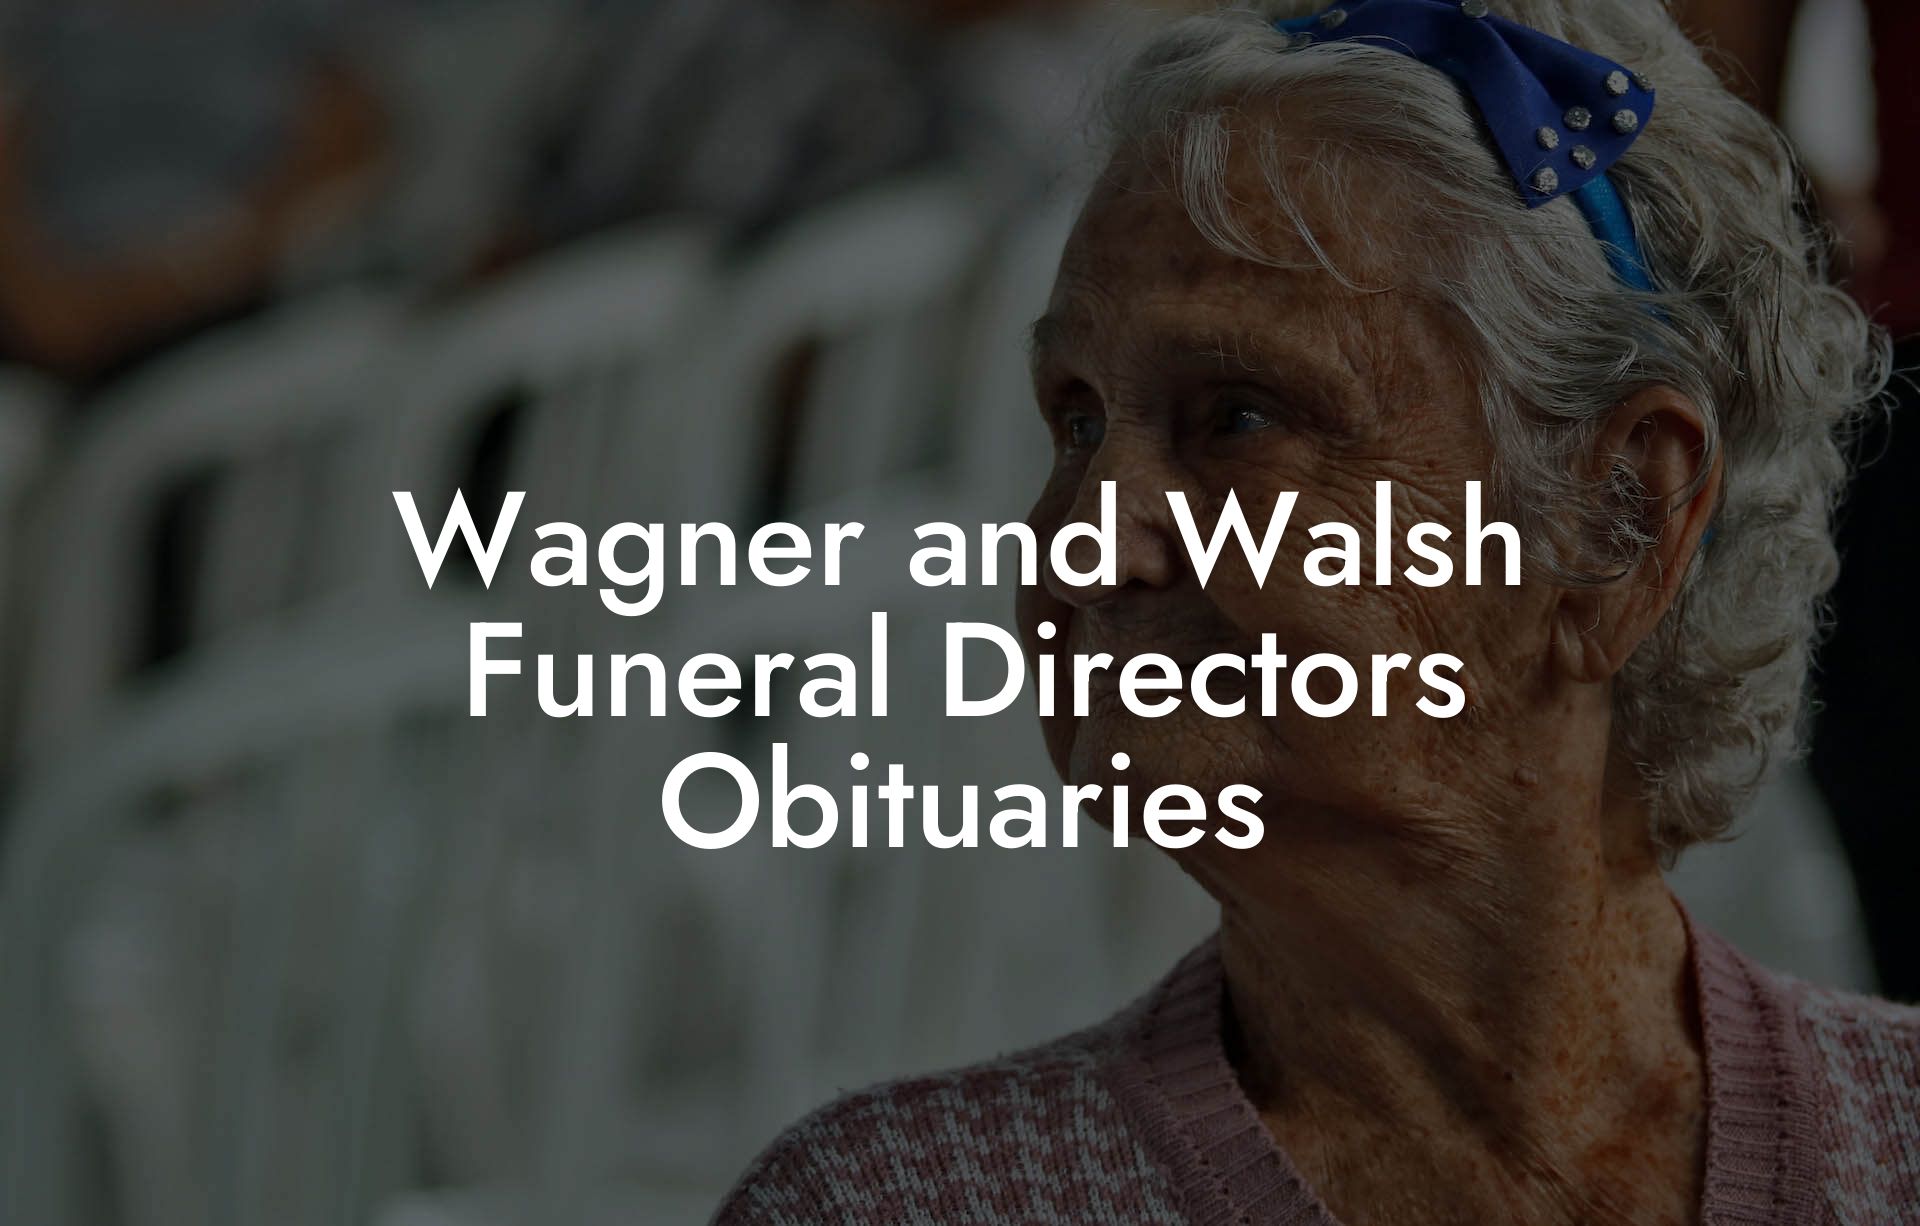 Wagner and Walsh Funeral Directors Obituaries